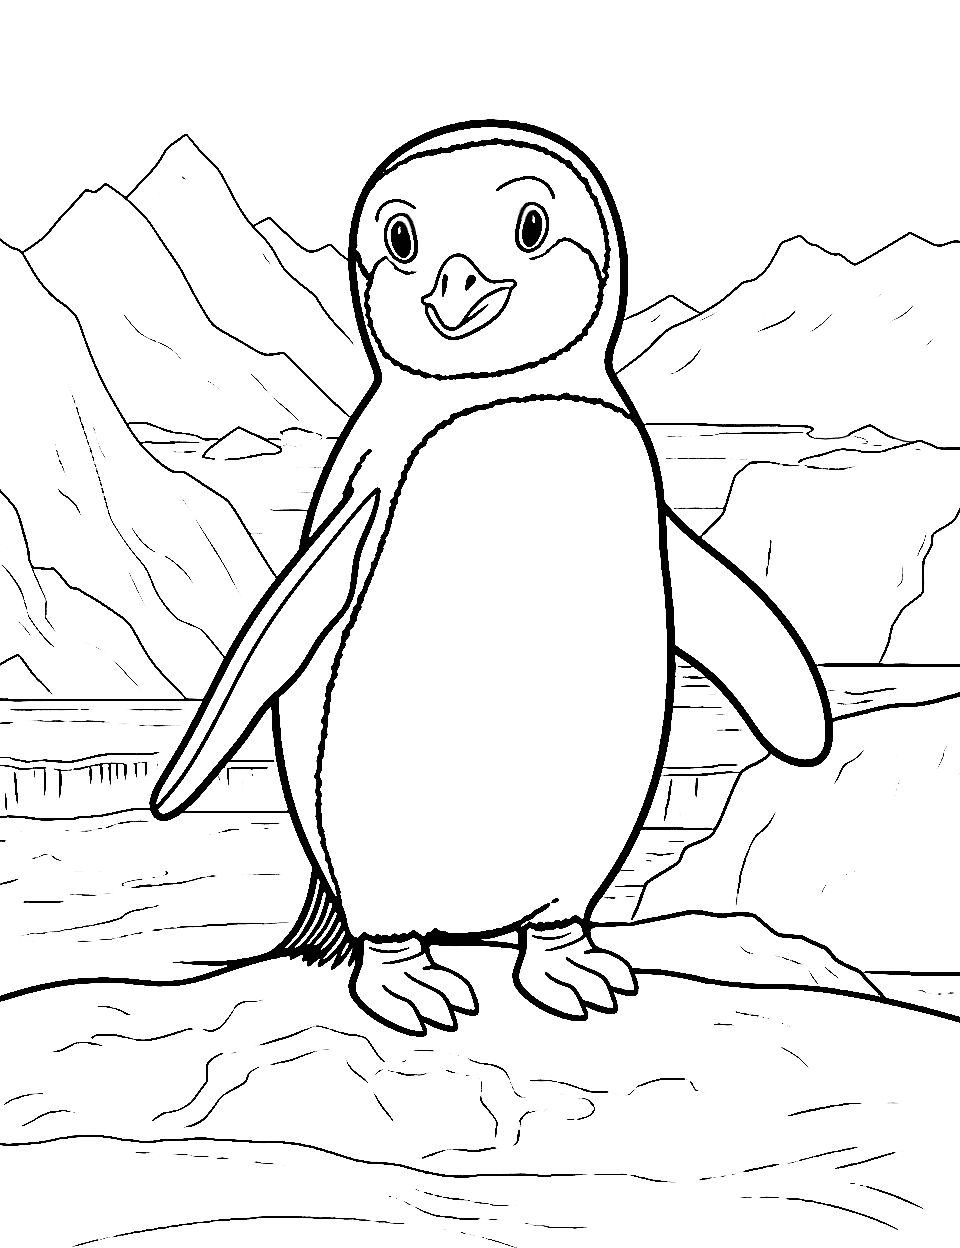 Penguin on Glacier Coloring Page - A solitary penguin on a glacier with a serene backdrop.